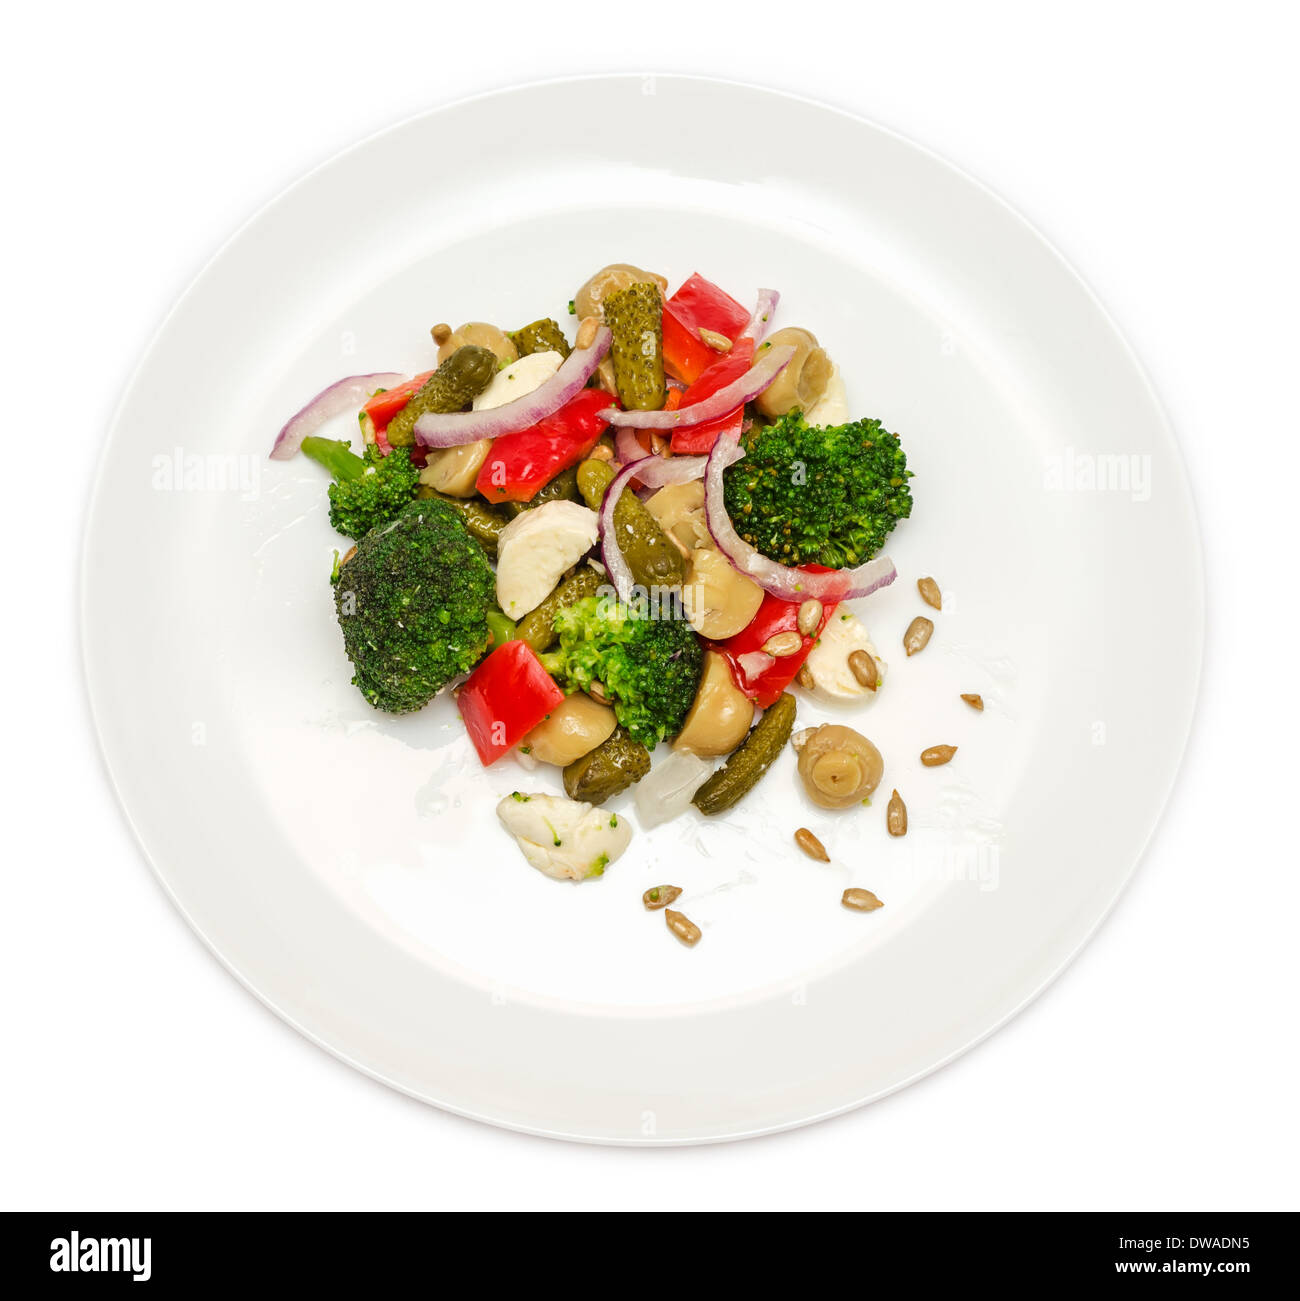 Broccoli salad with bell peppers, pickled cucumber, mushrooms and mozzarella. Isolated on white background. Stock Photo